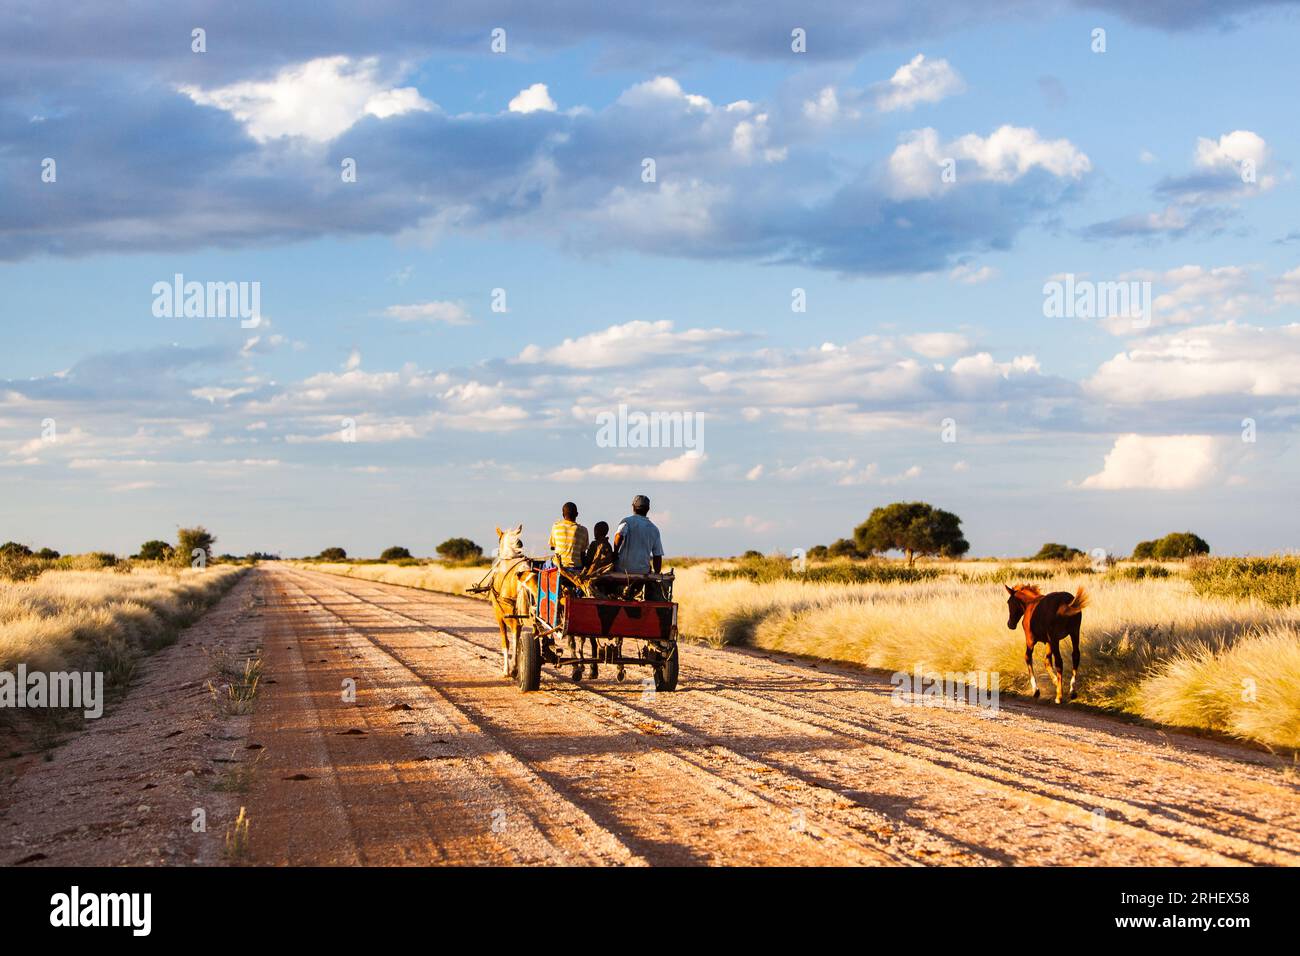 Horse-drawn carriage transport on rural gravel road with blue sky and puffy clouds in Namibia rural poor developing country Africa Stock Photo